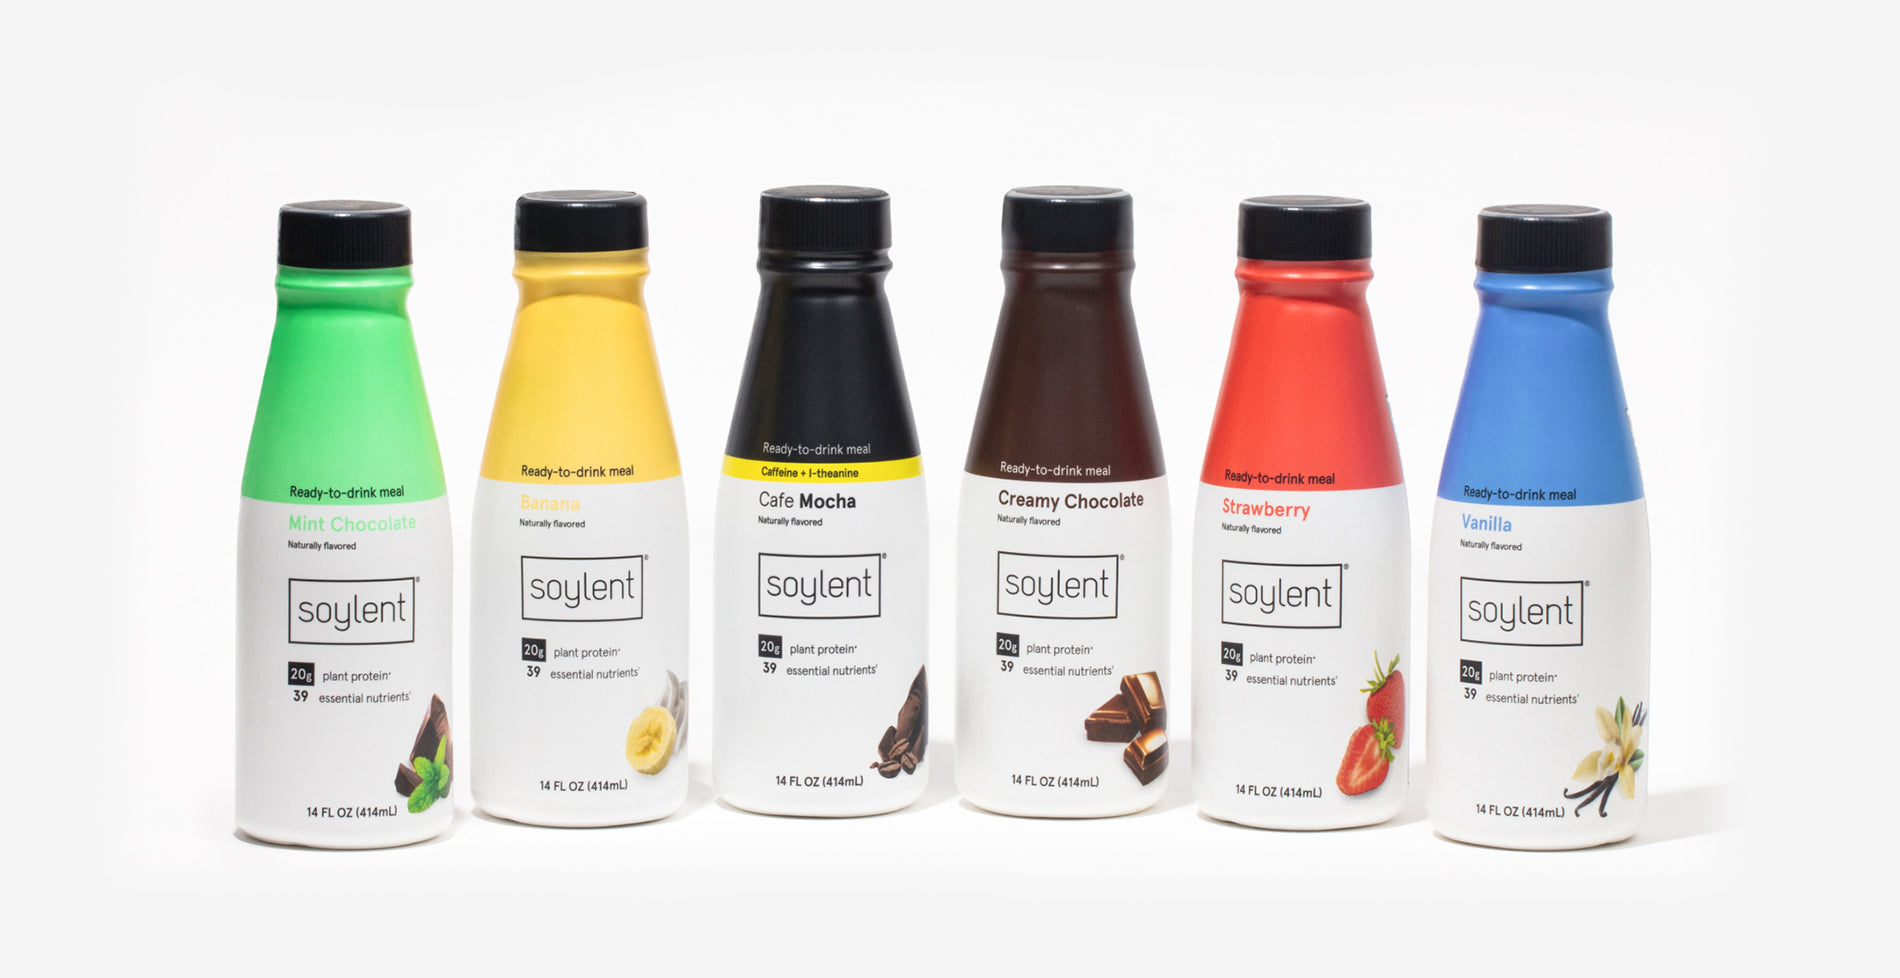 Where Can I Get Soylent?